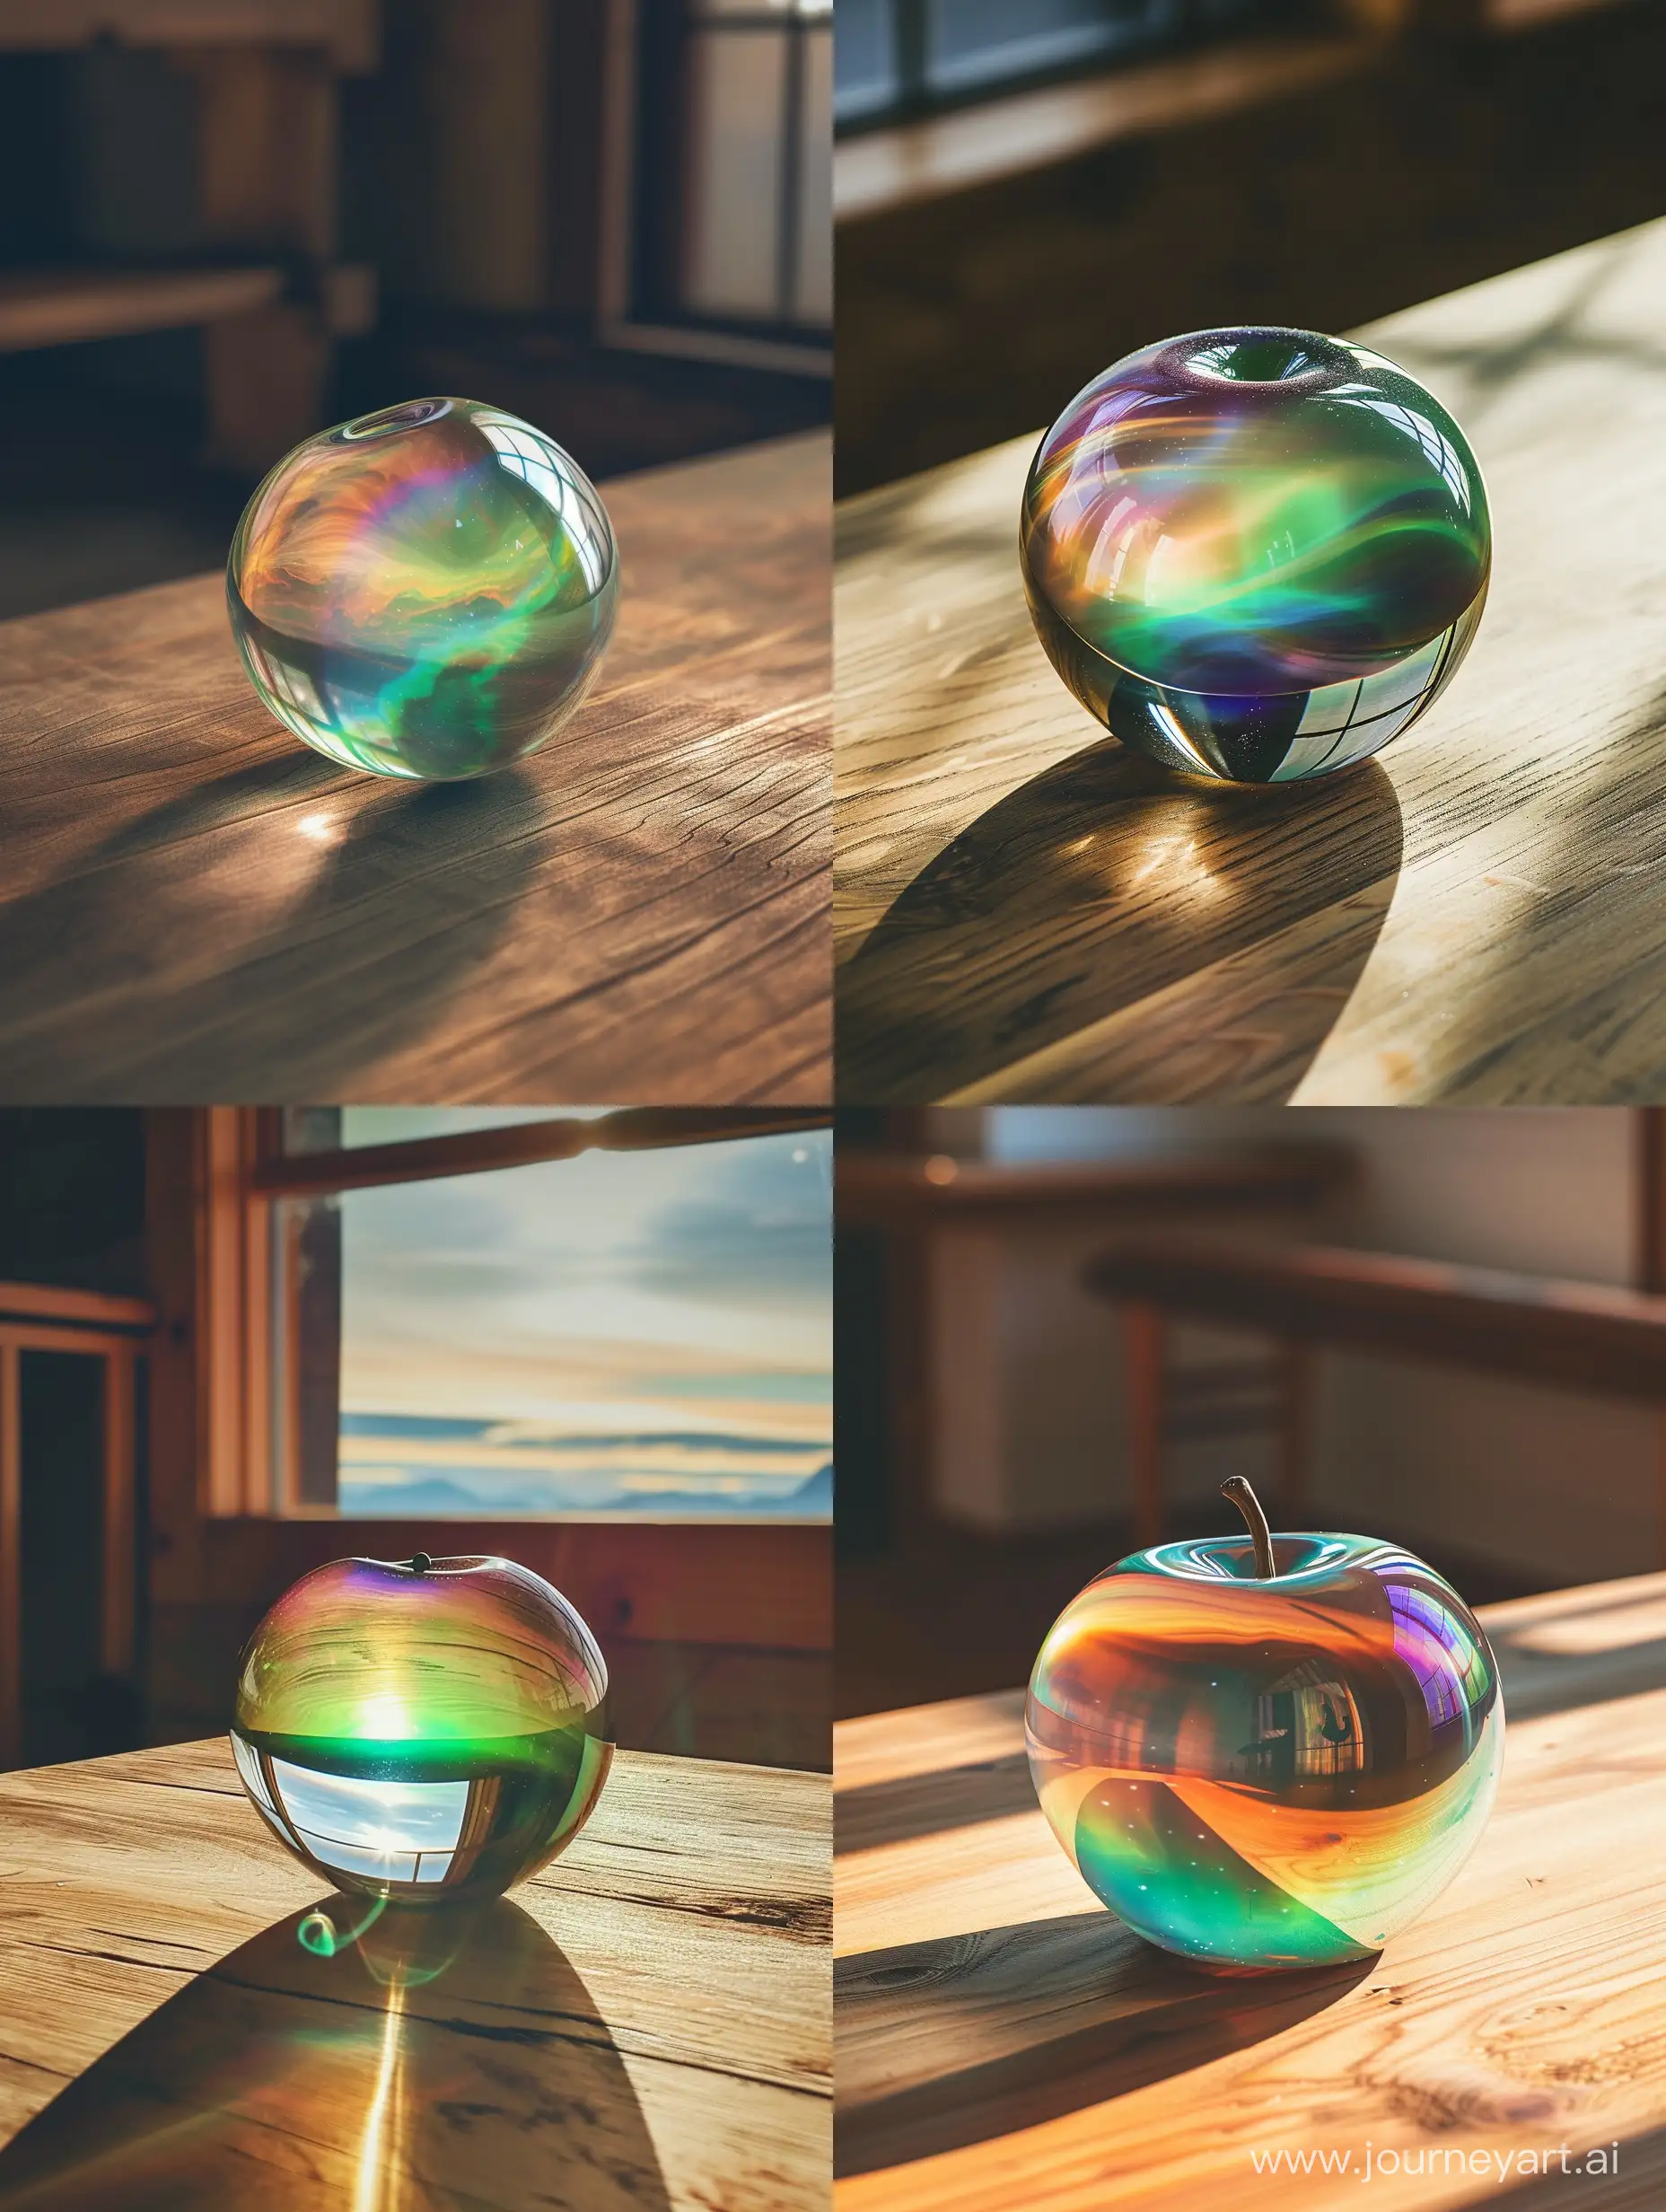 Captivating-Glass-Apple-Display-with-Aurora-Borealis-Colors-on-Wooden-Table